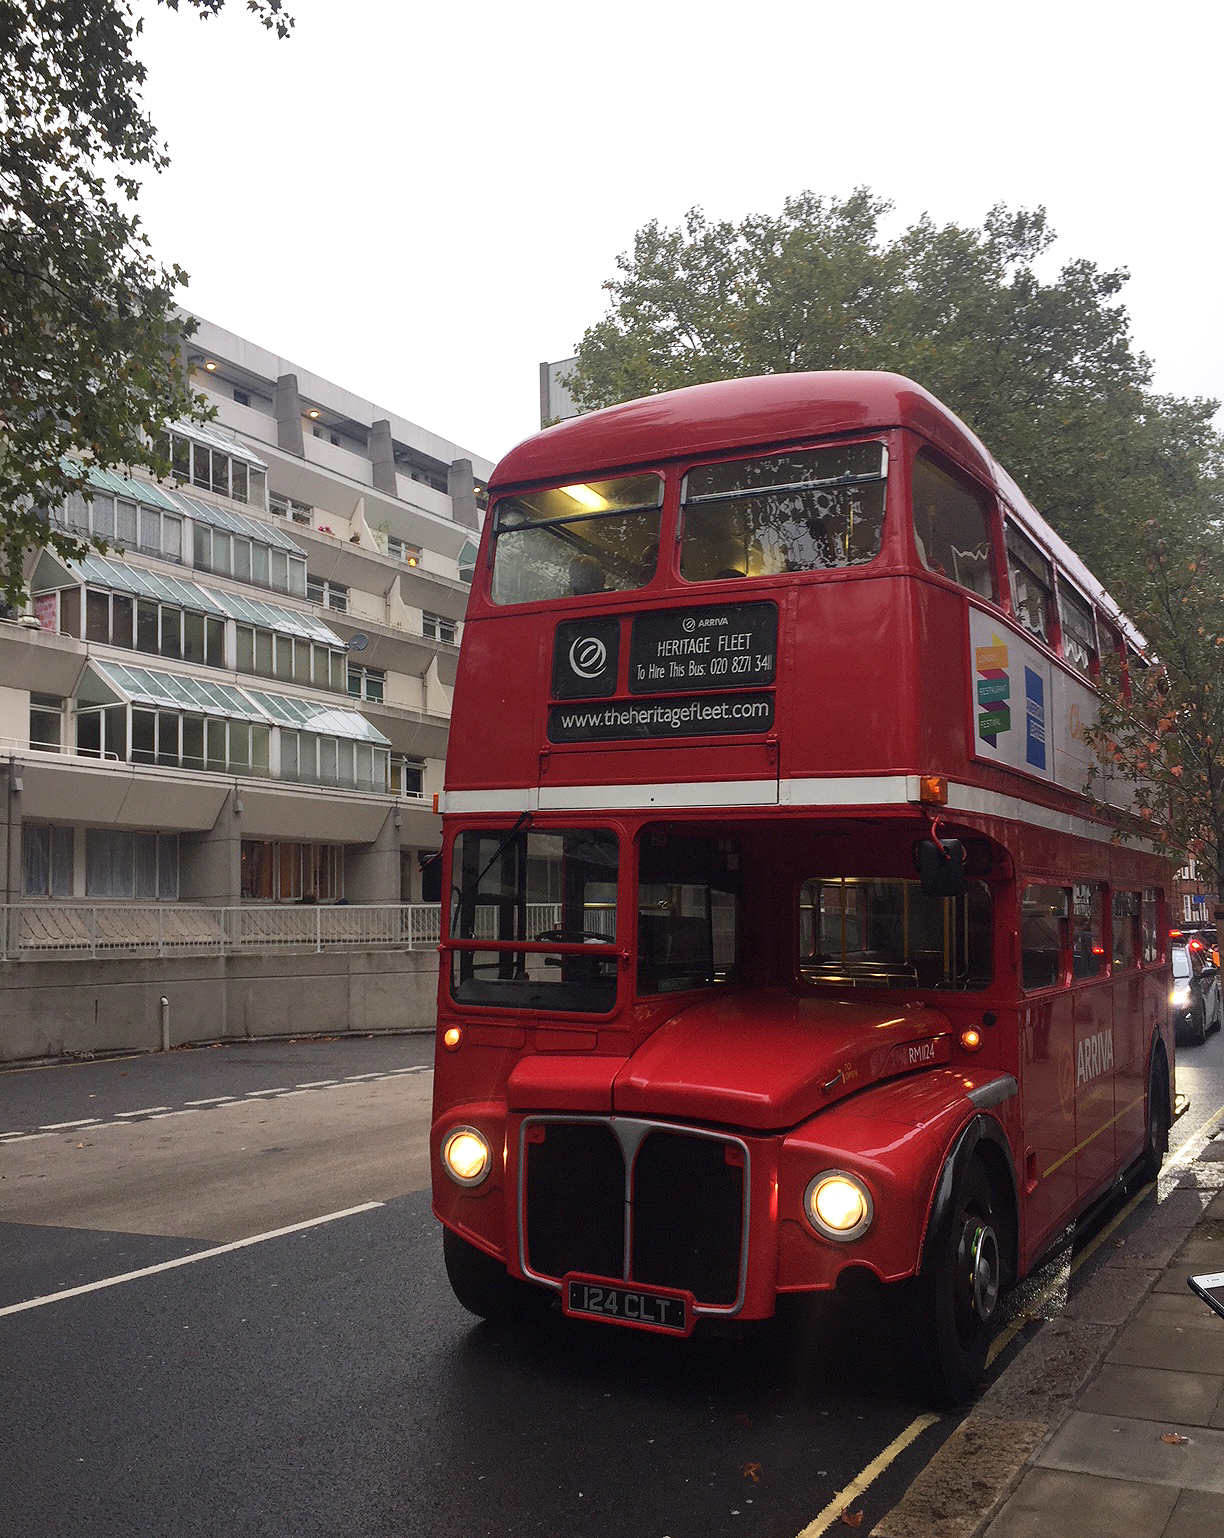 The Routemaster bus at the Brunswick Centre